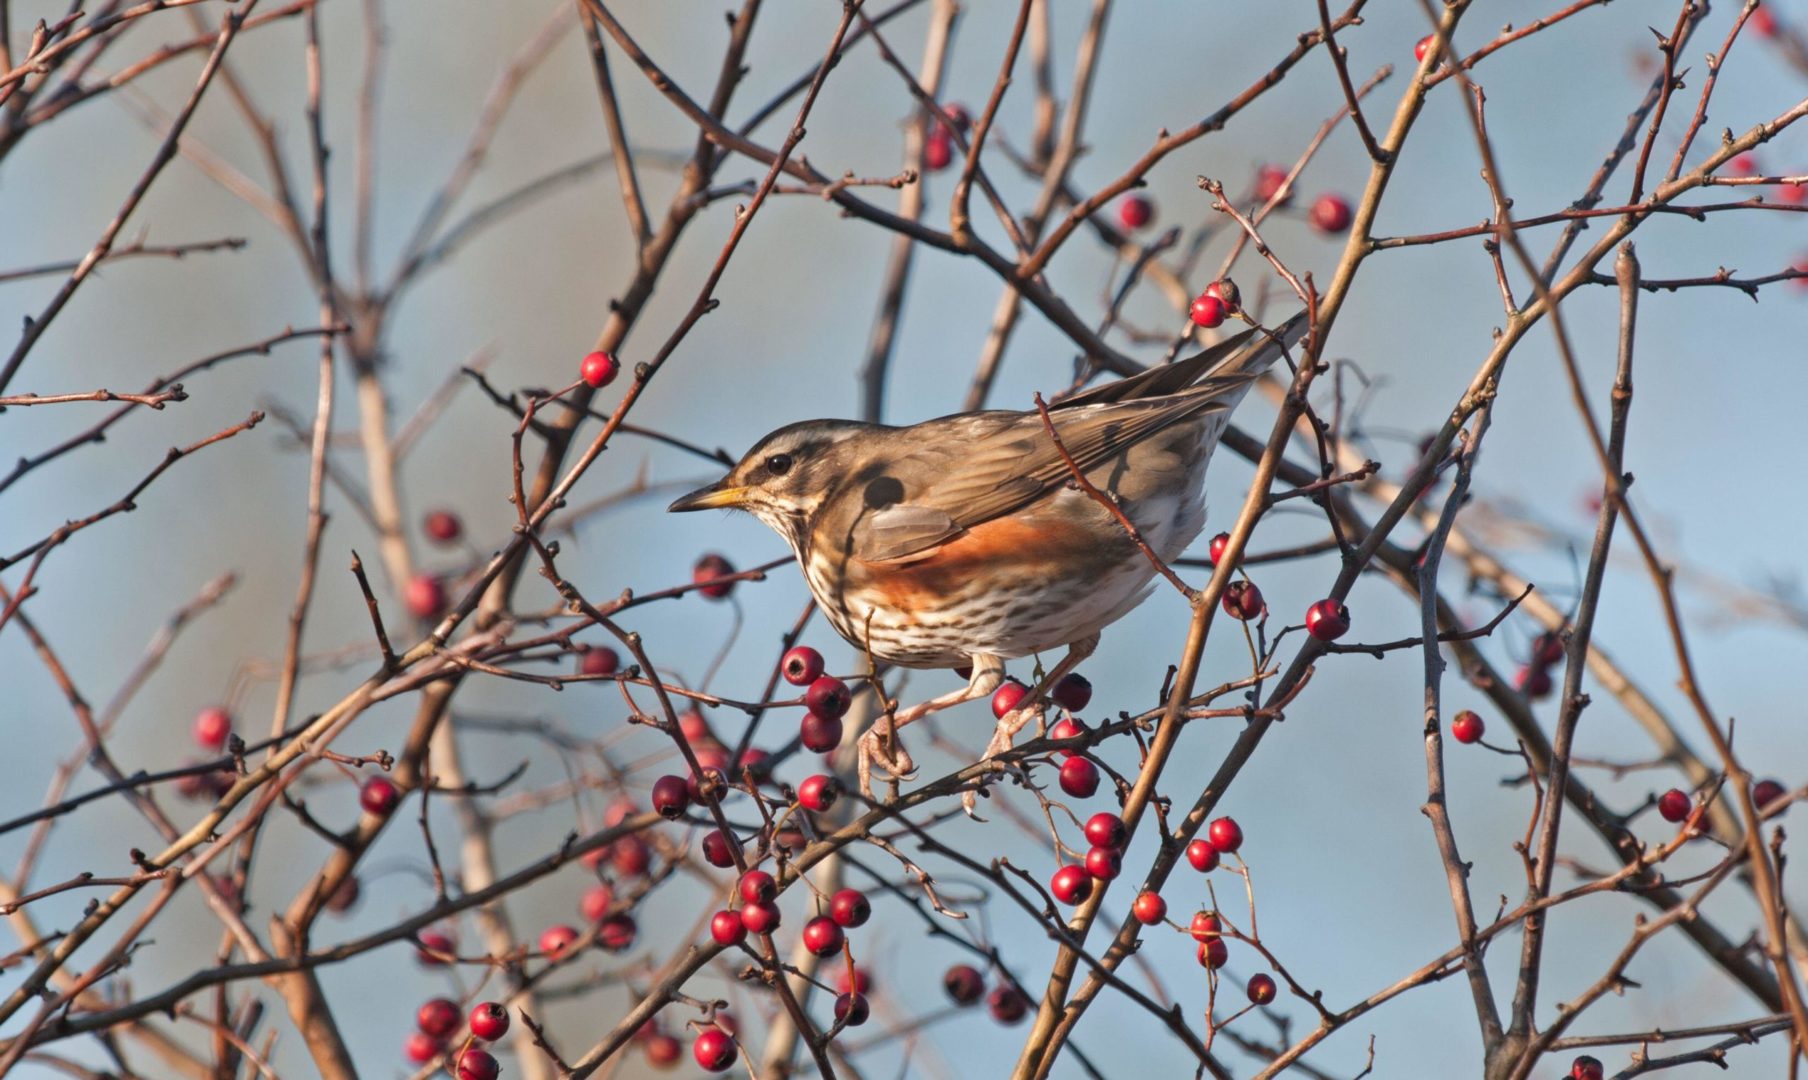 Redwing in a berry-laden hawthorn tree on a wintry day